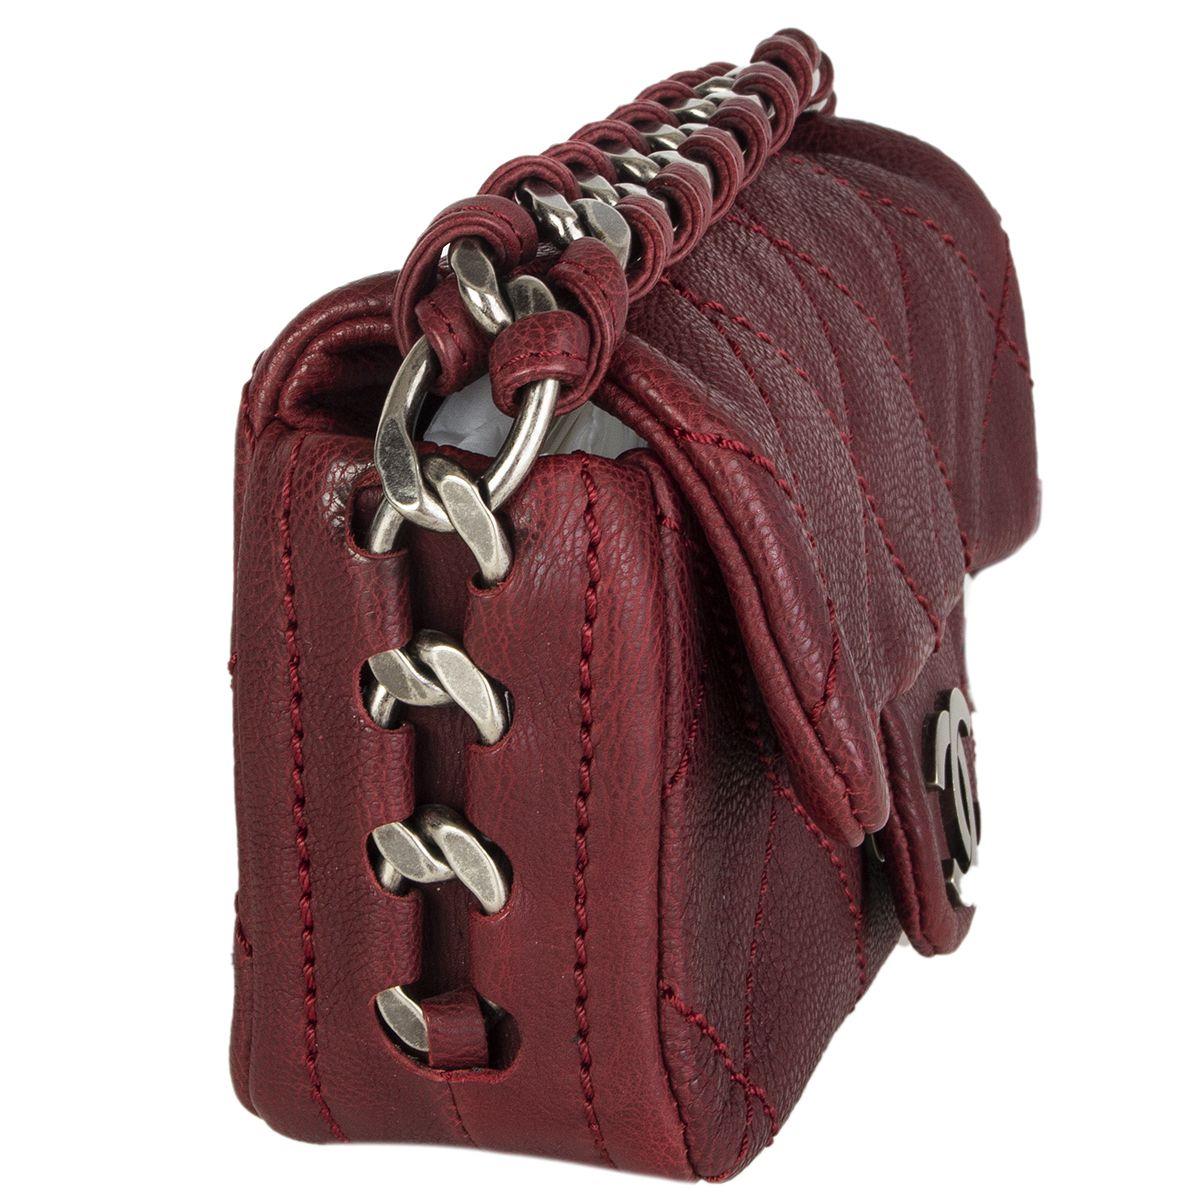 Chanel 'Modern Chain' mini flap bag in burgundy washed caviar leather featuring gunmetal CC push button closre and chunky chain shoulder strap. Lined in nude calfskin with one open pocket against the back. Has been carried and is in excellent